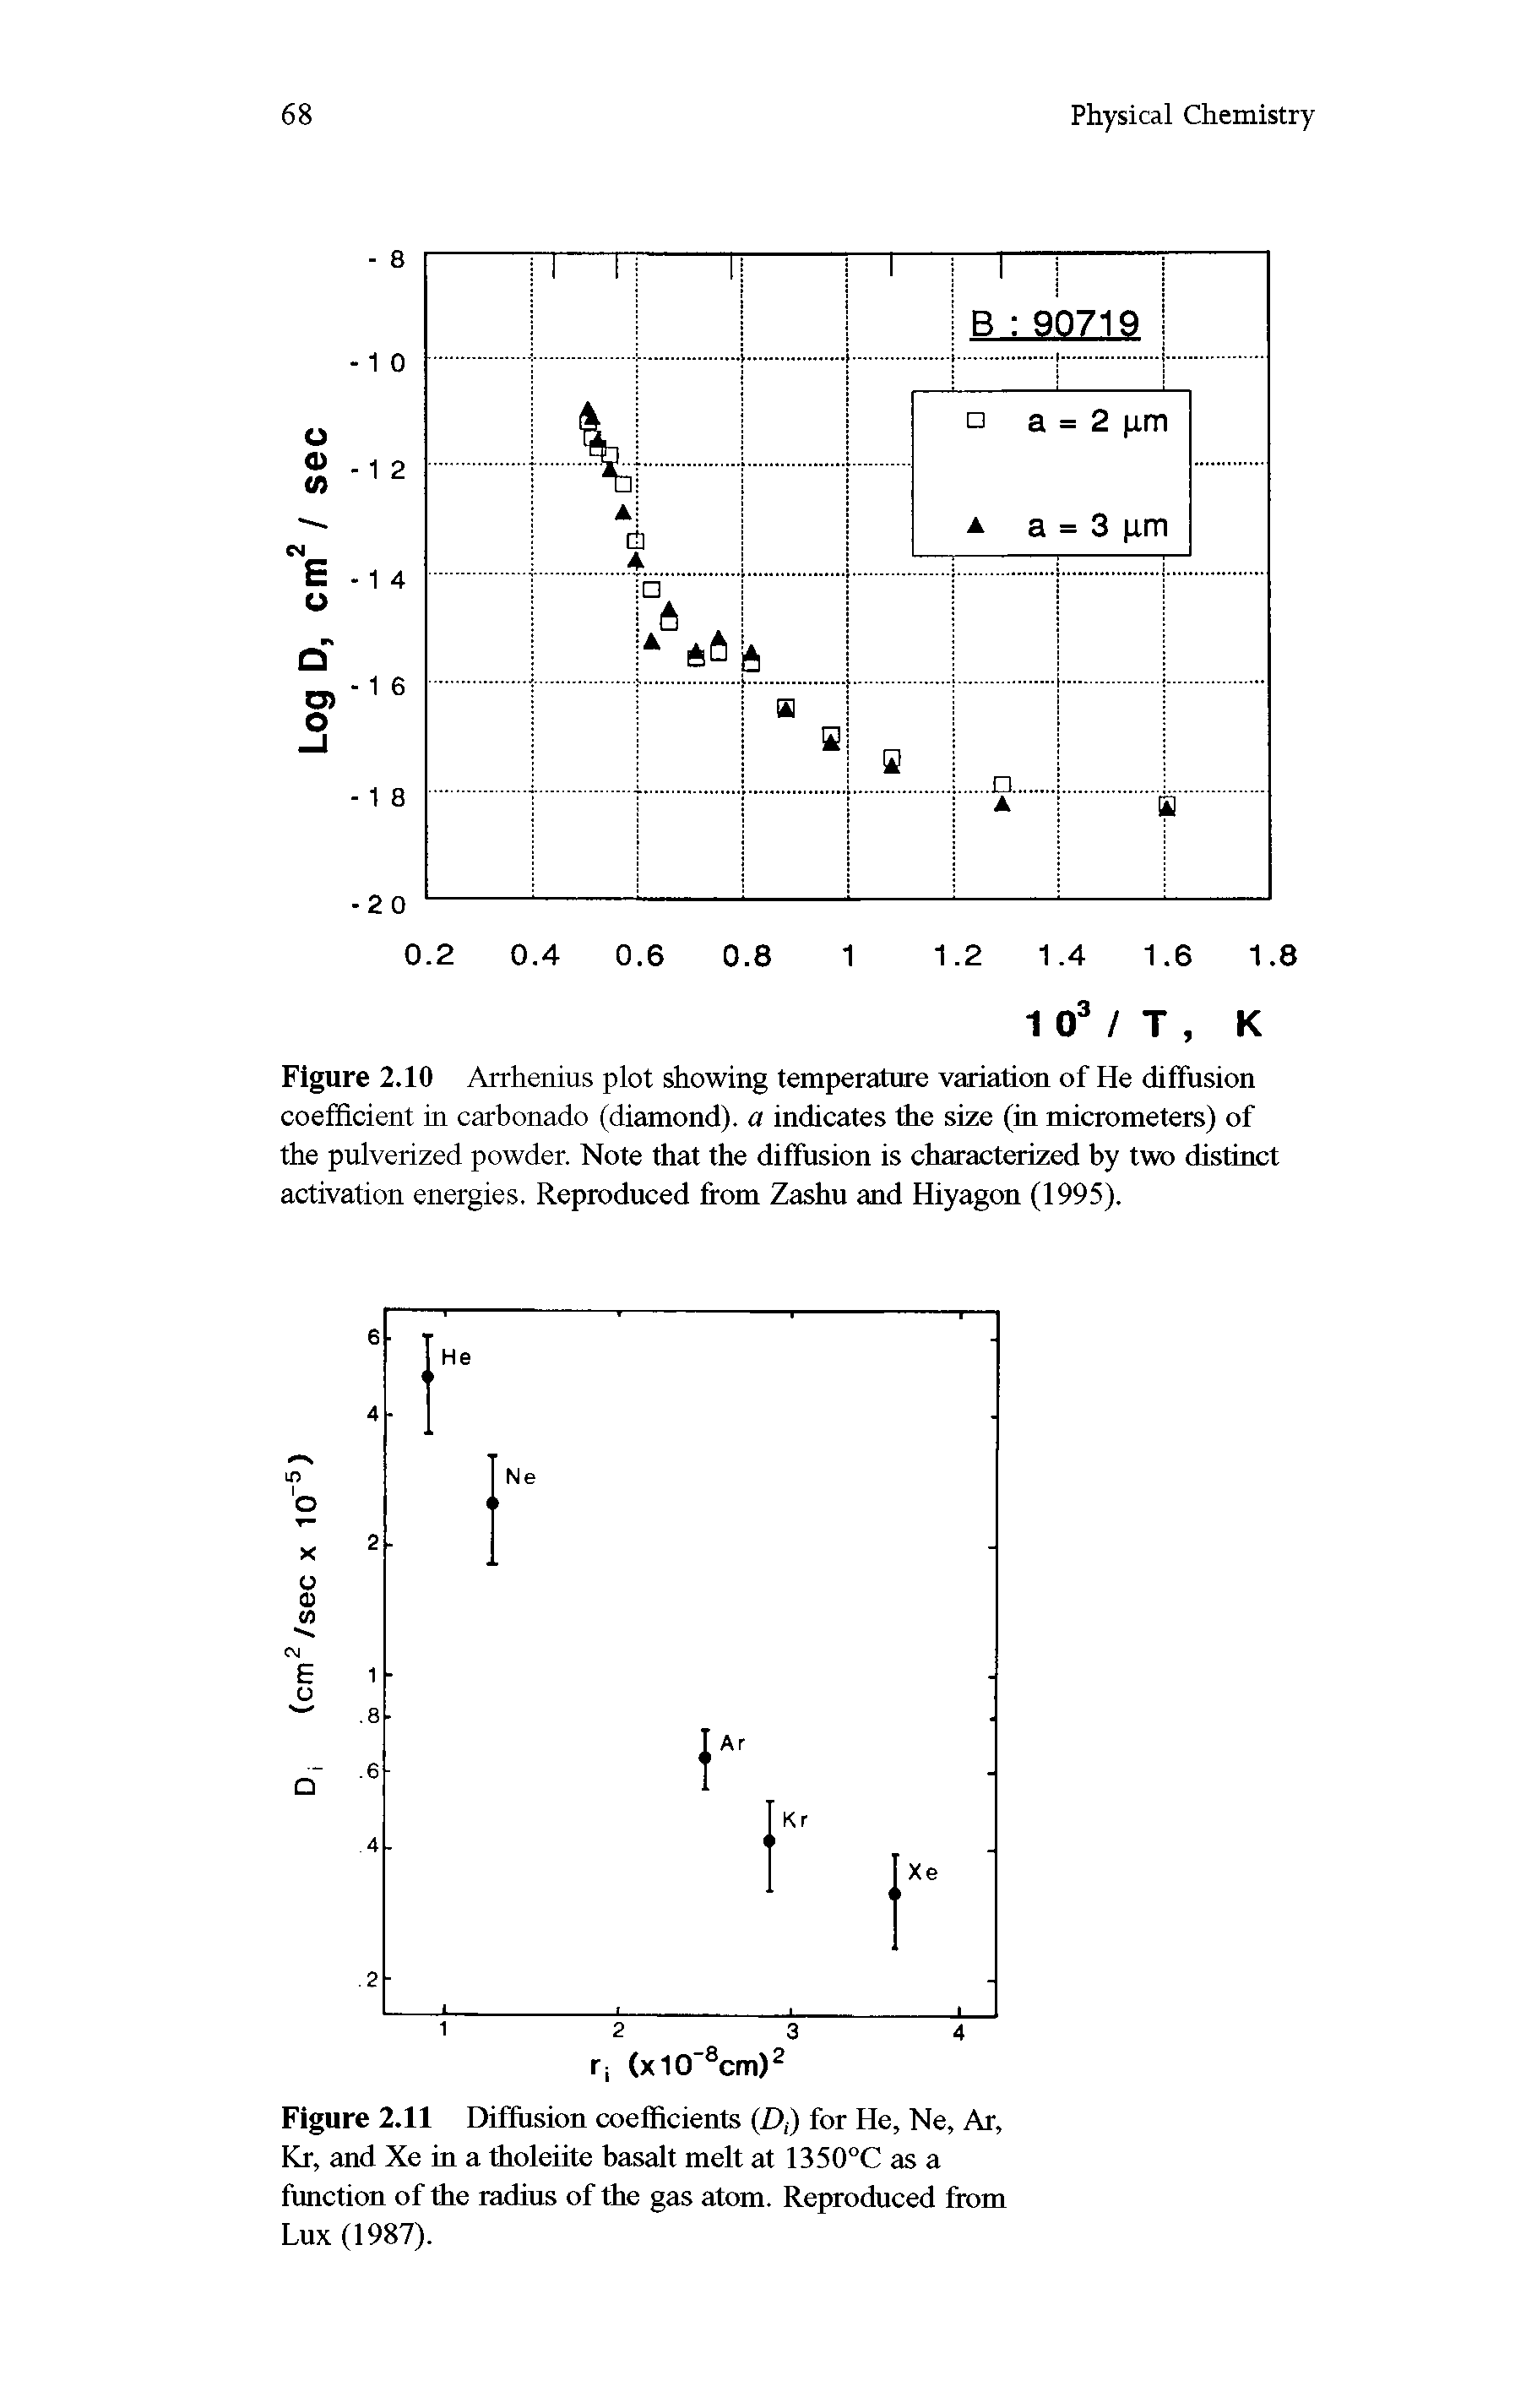 Figure 2.10 Arrhenius plot showing temperature variation of He diffusion coefficient in carbonado (diamond), a indicates the size (in micrometers) of the pulverized powder. Note that the diffusion is characterized by two distinct activation energies. Reproduced from Zashu and Hiyagon (1995).